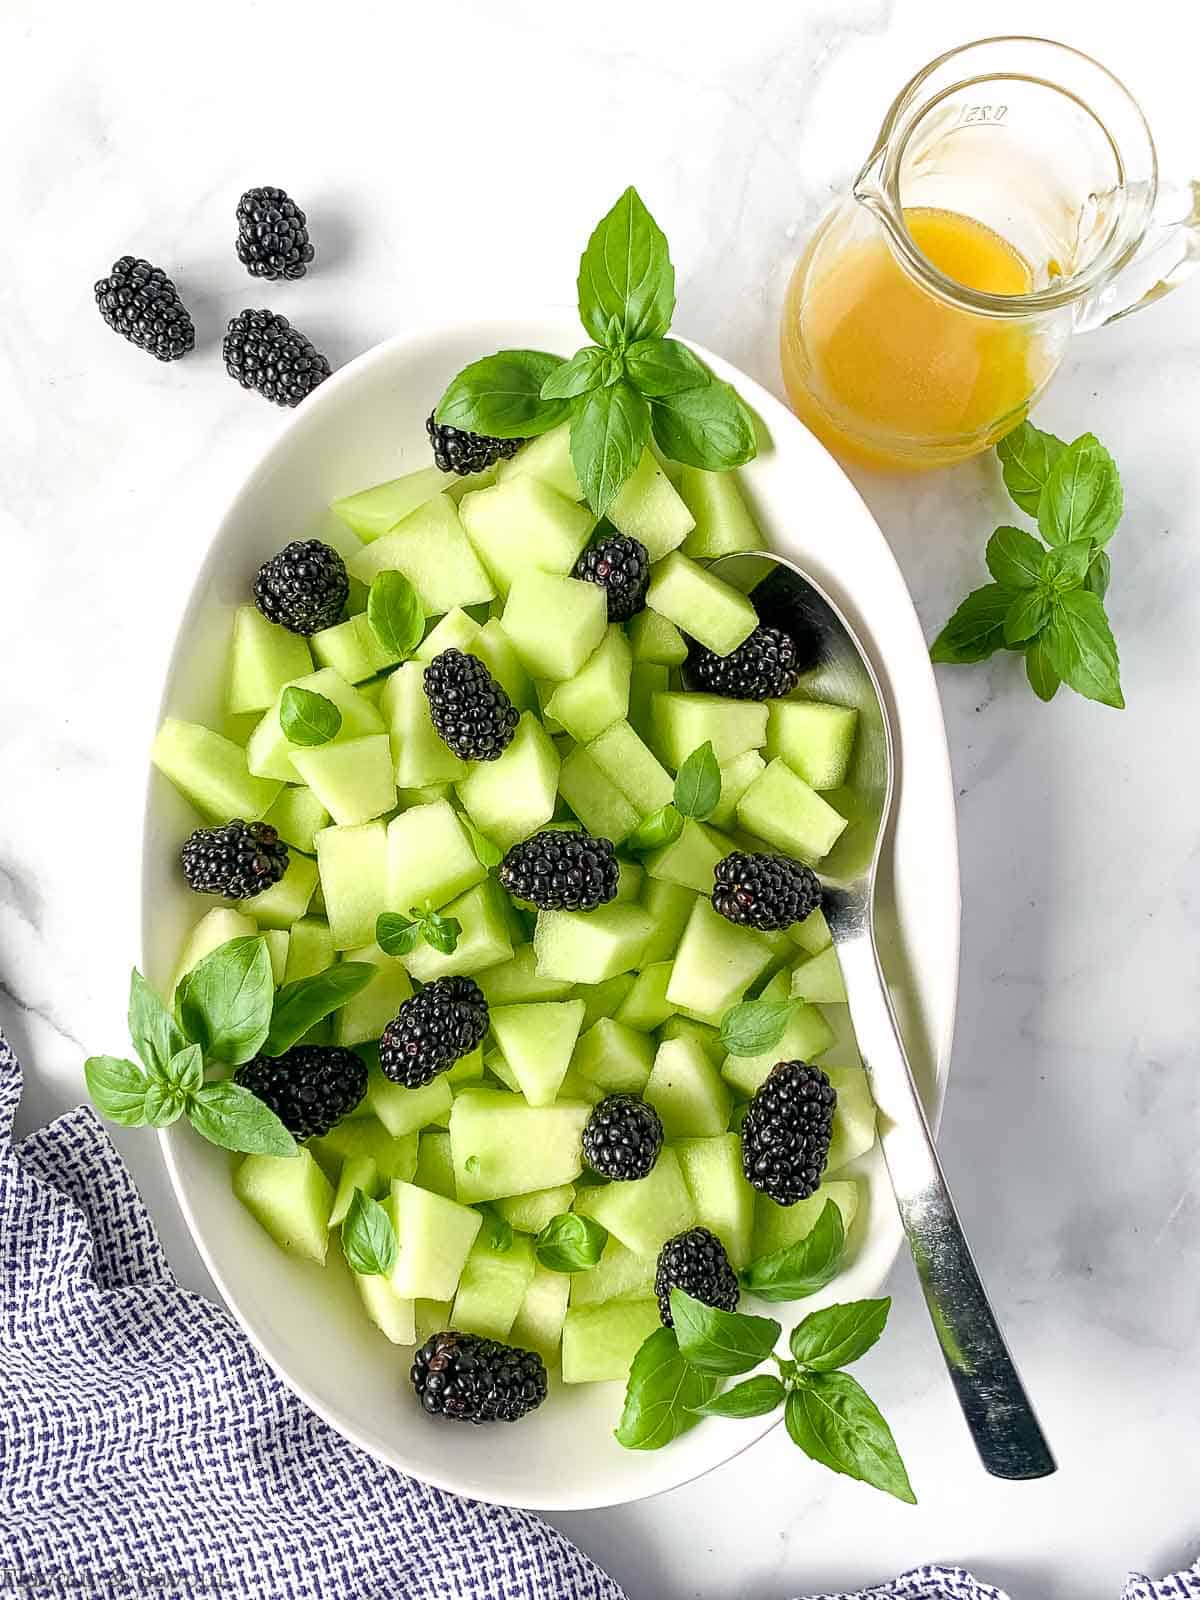 Blackberry Honeydew Salad with basil in an oval bowl.